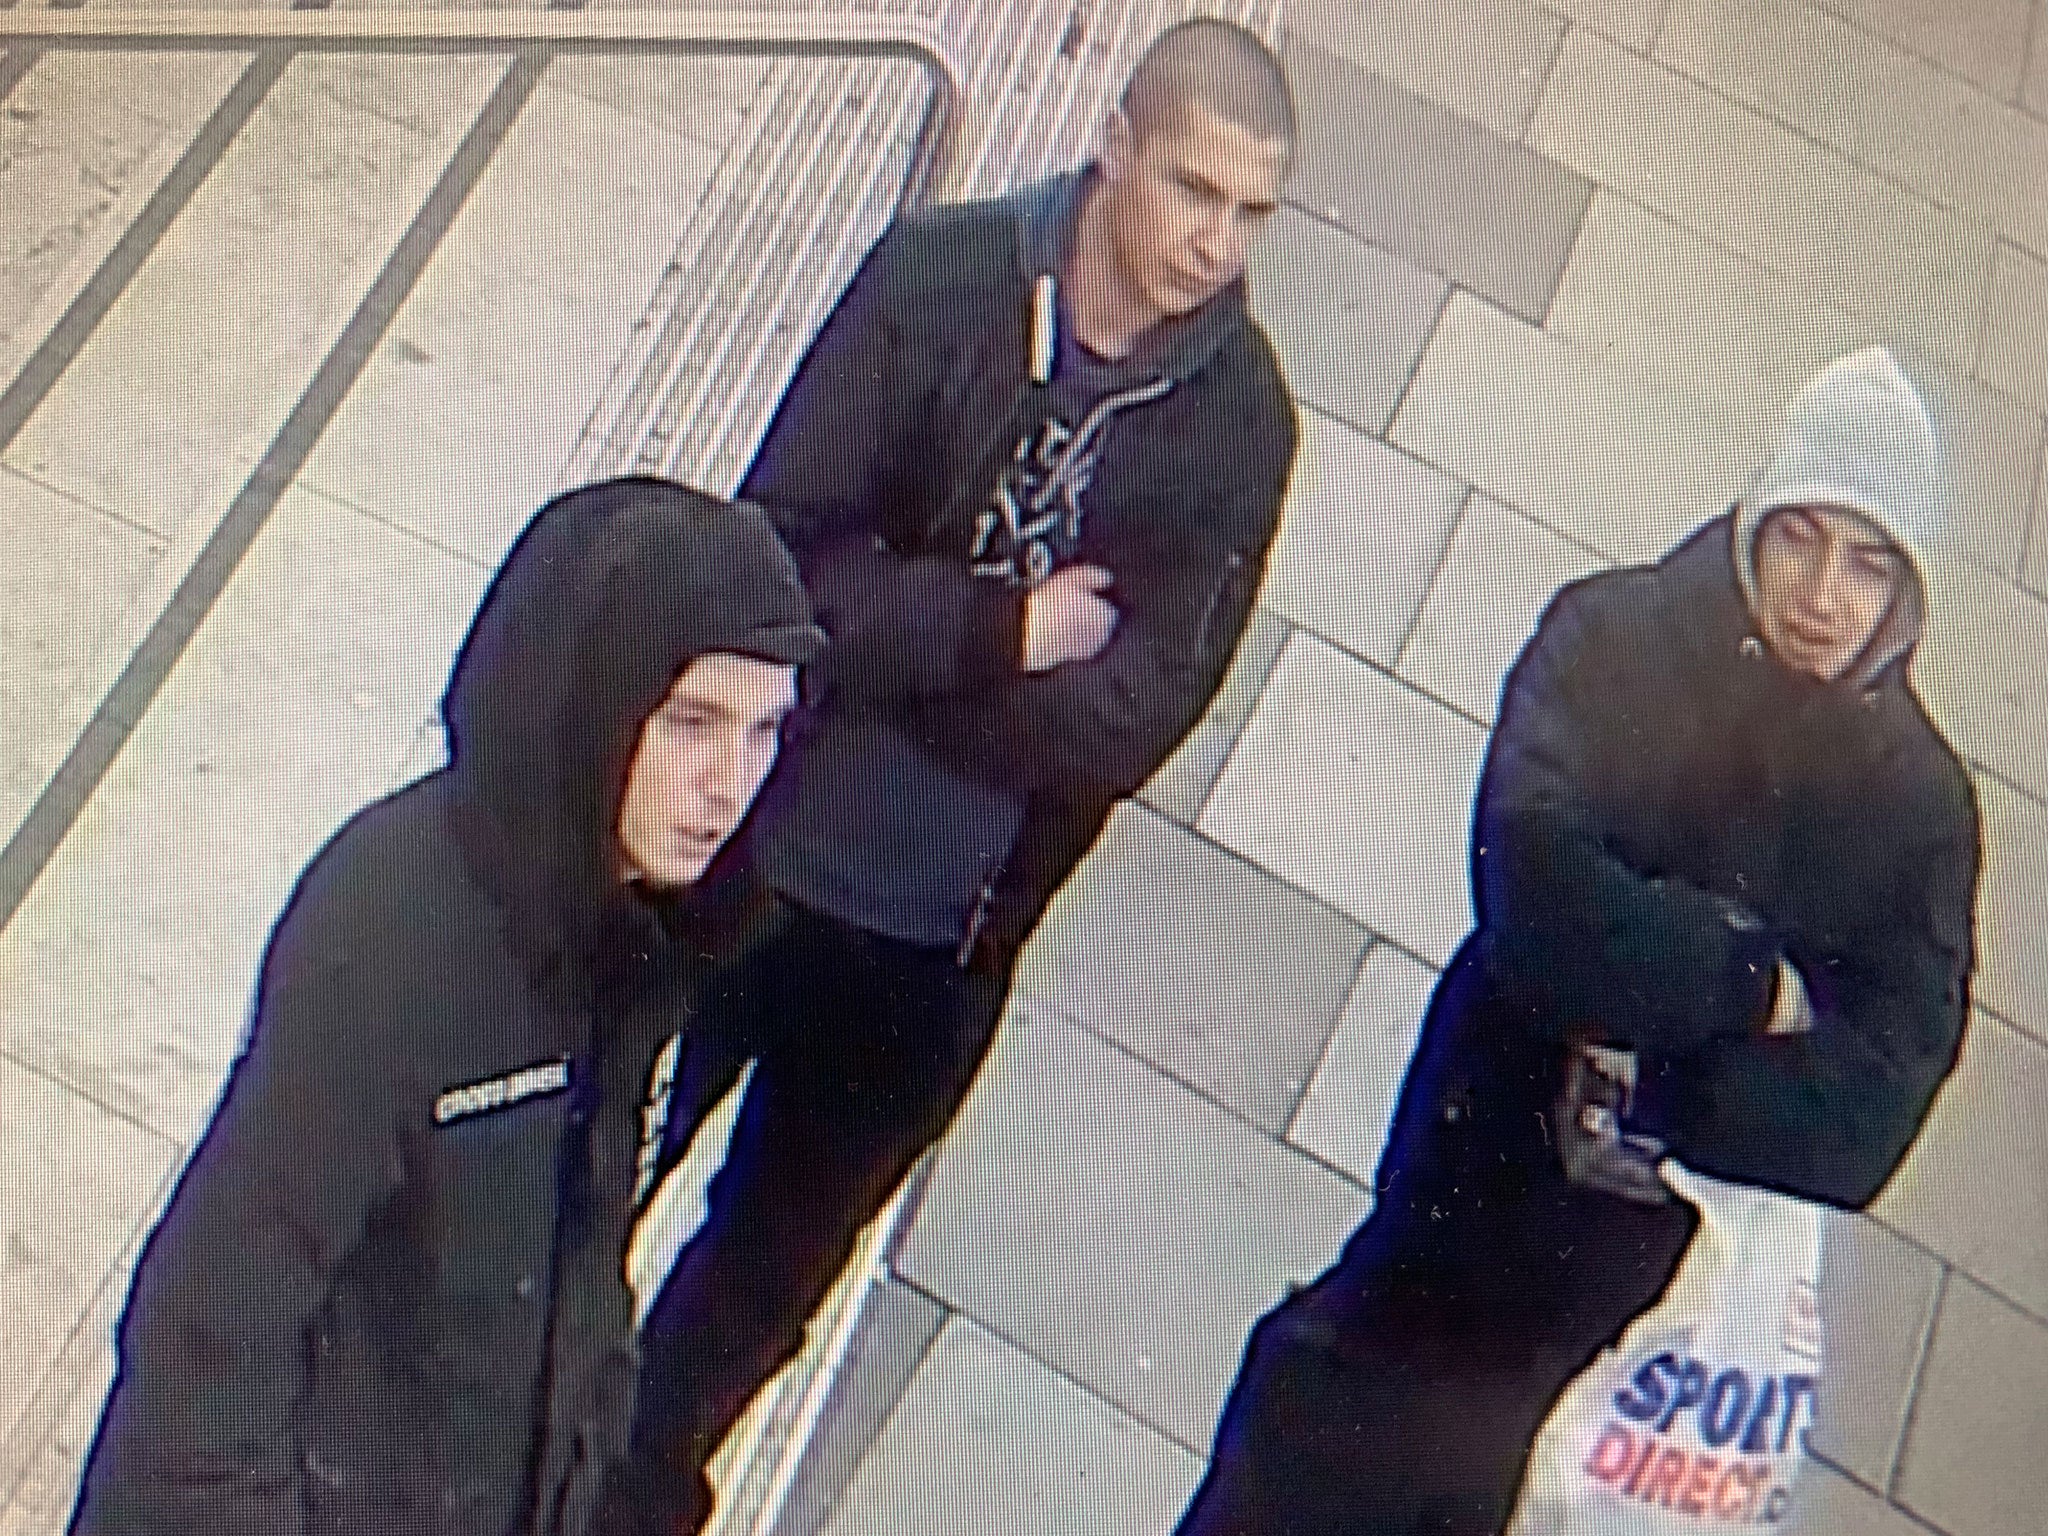 Three of four suspects sought following homophobic assault in London on 1 January